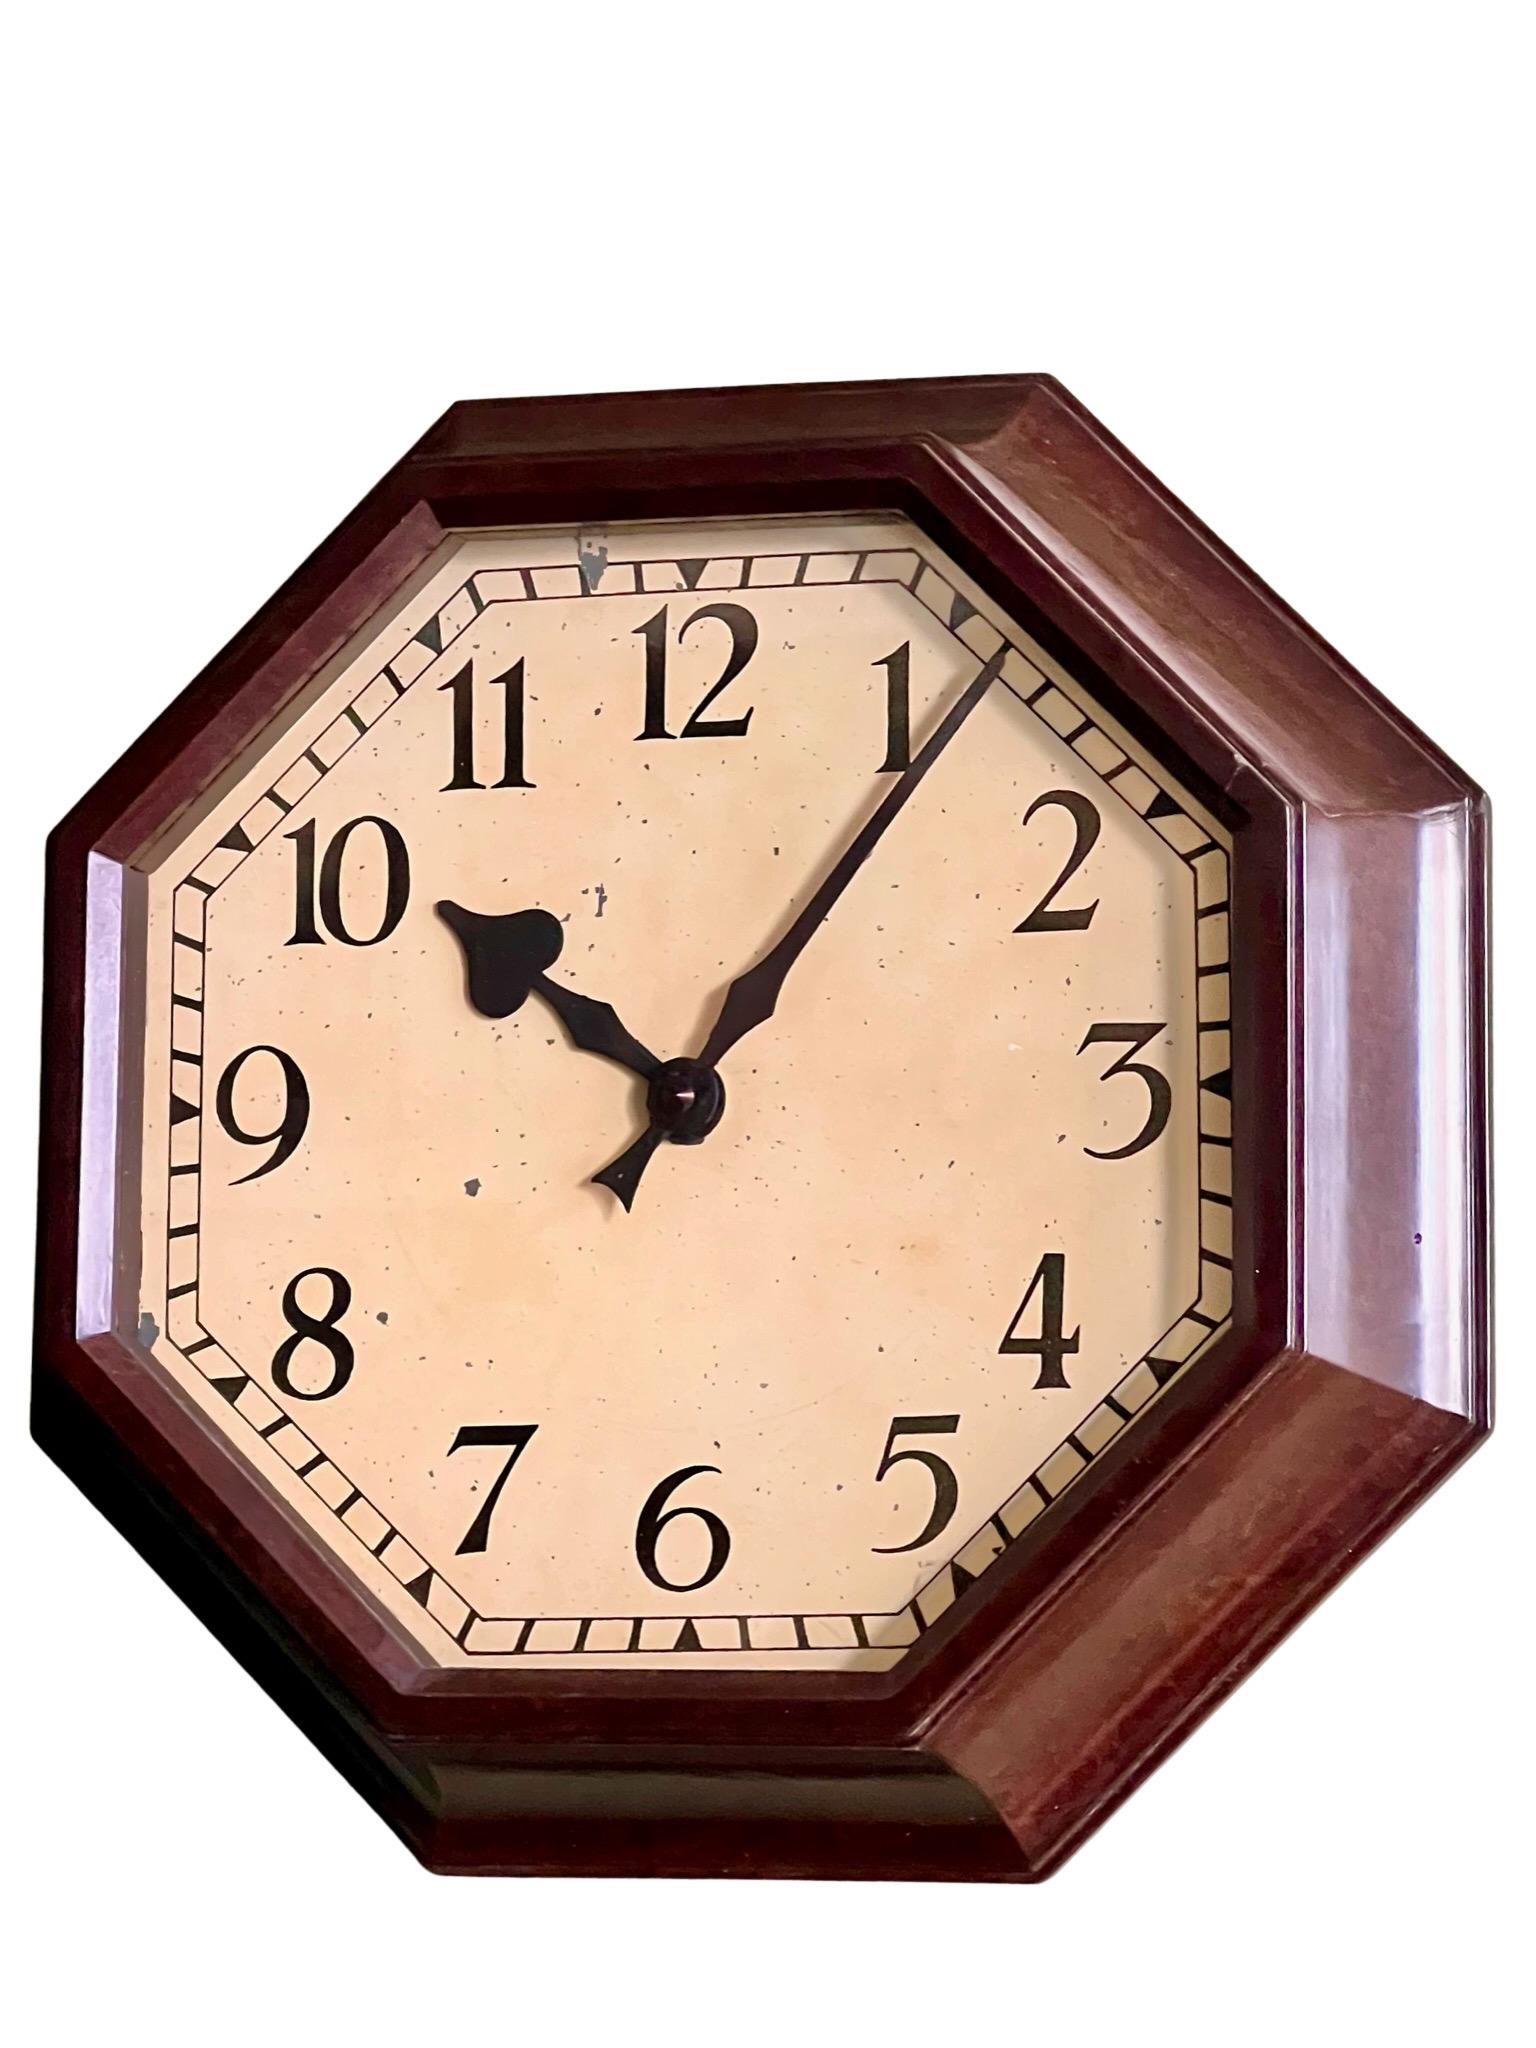 Stylish Art Deco bakelite octagonal moulded wall clock with rear brass hanging bracket, white painted dial with Gothic Arabic dial and black spade hands.

This is a stunning piece of vintage design that captures the essence of the Art Deco